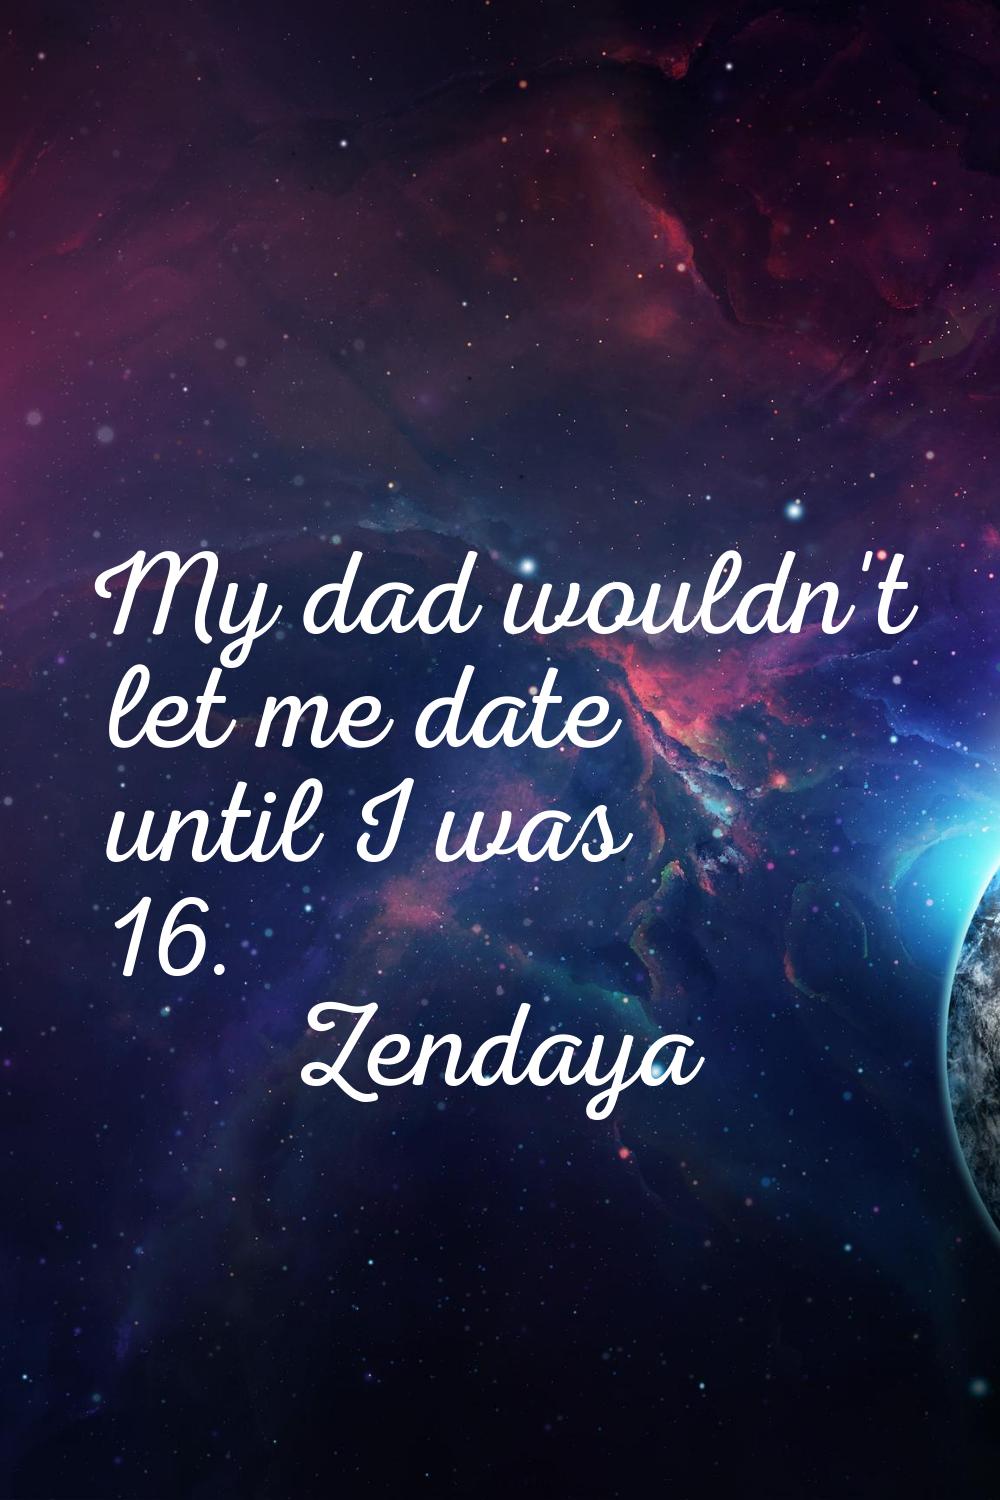 My dad wouldn't let me date until I was 16.